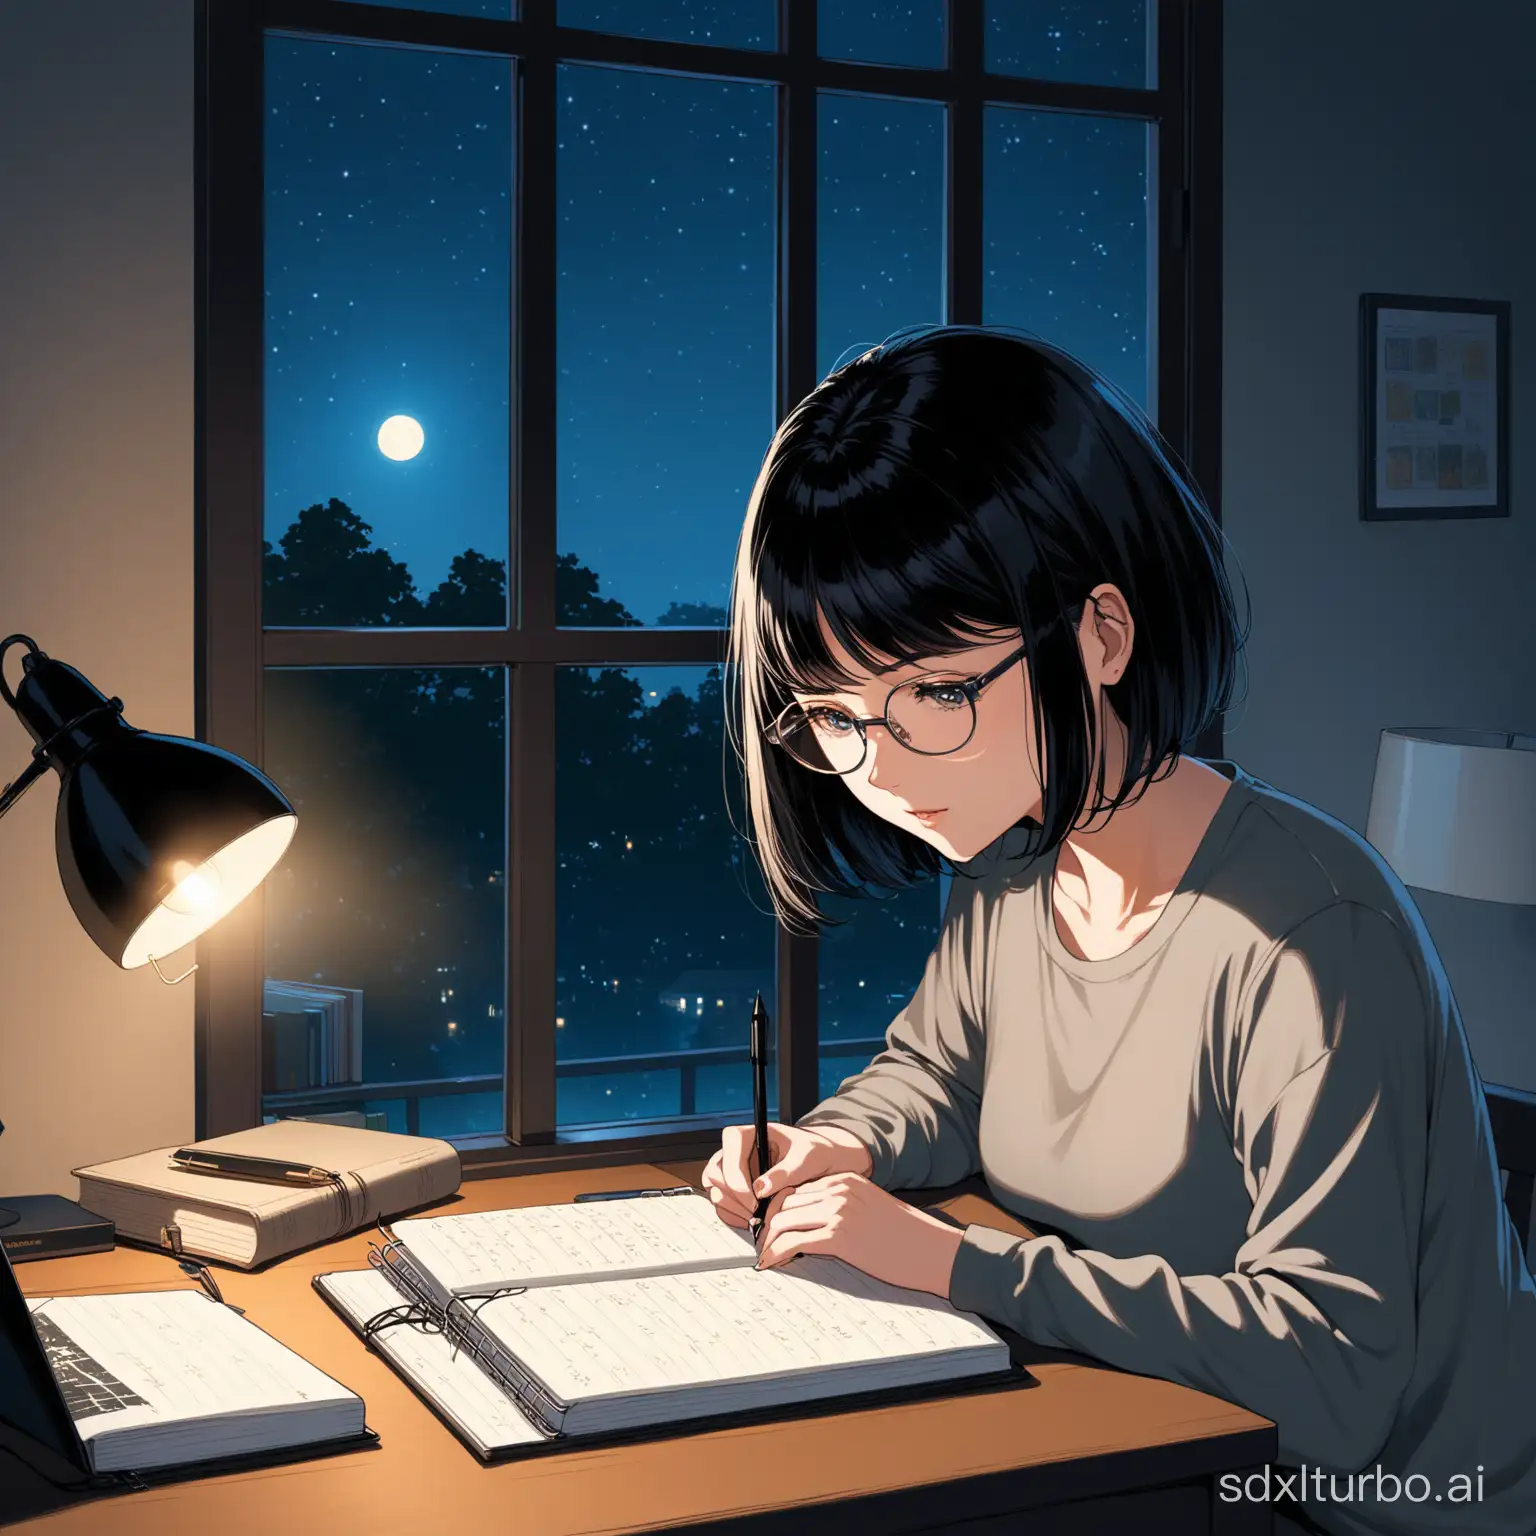 The woman with black bob hair wearing glasses and a grey long-sleeve t-shirt is writing something beside the window at night. Her eyes are looking at the notebook. There is a lamp on the desk, and some books are on the corner of the desk, with a computer in front of it.